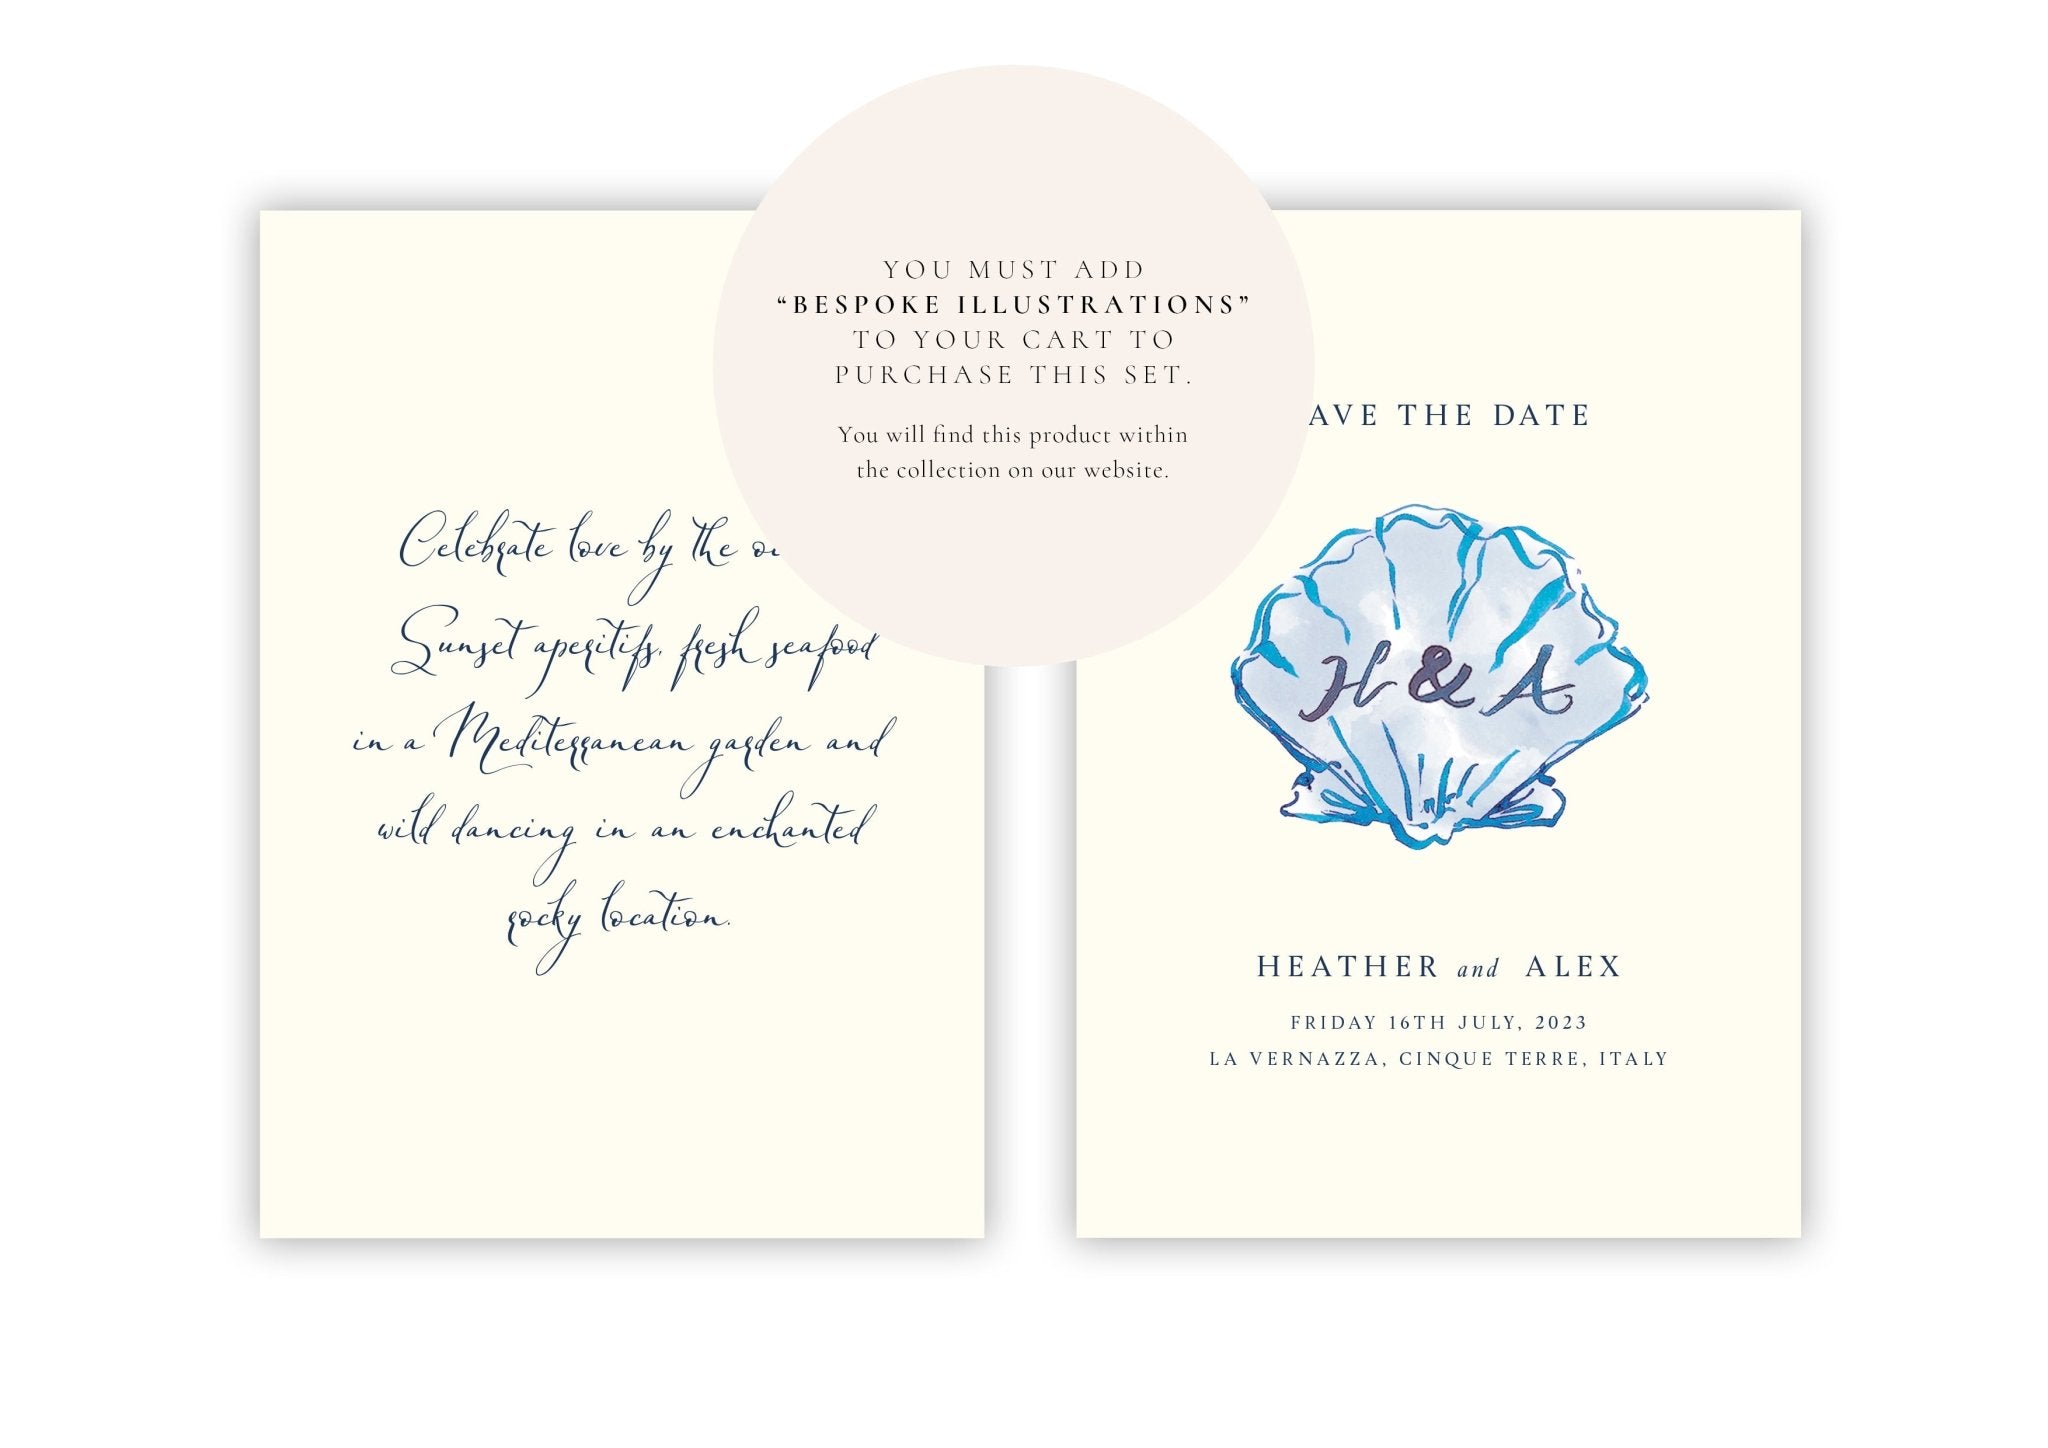 Natasha Howie X Ten story - Save The Date - Ten Story Stationery